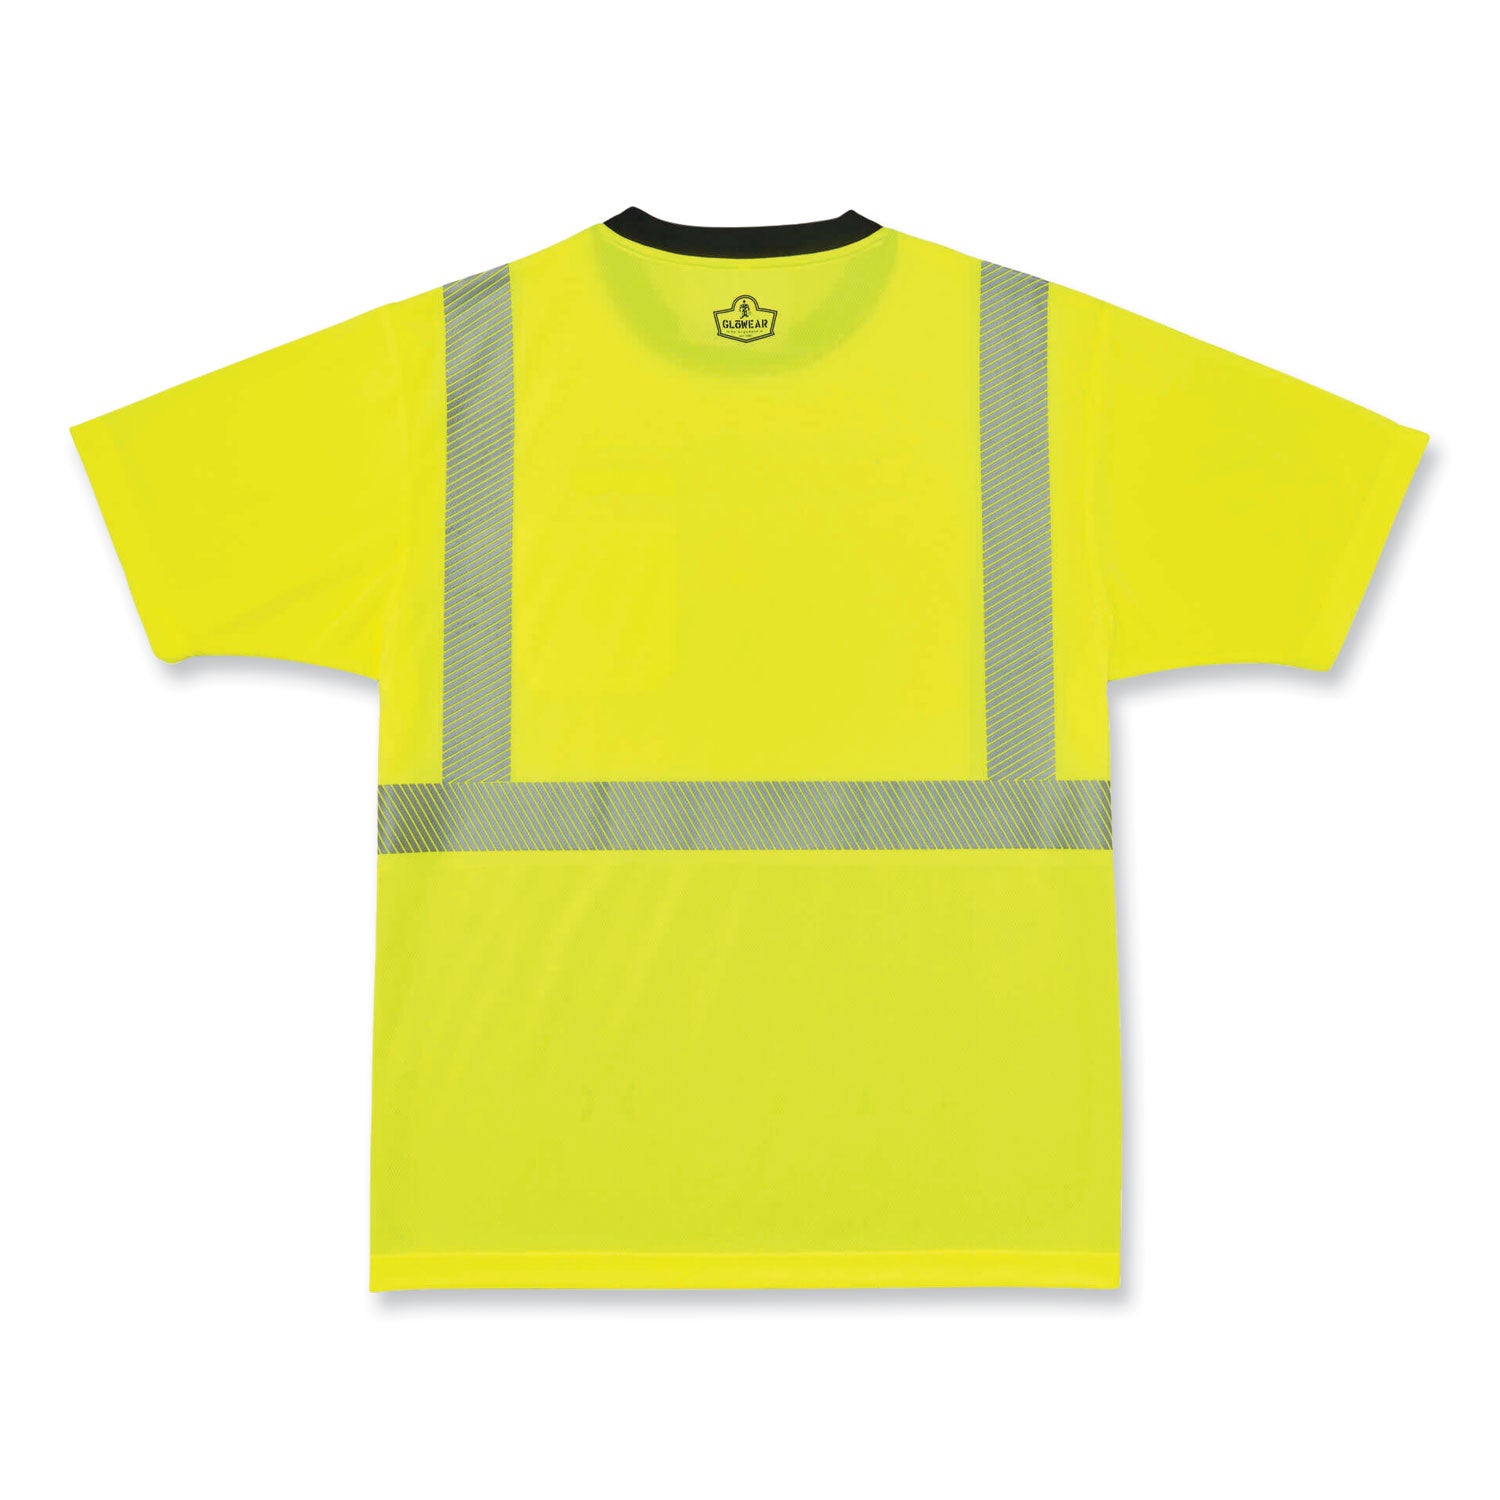 glowear-8280bk-class-2-performance-t-shirt-with-black-bottom-polyester-2x-large-lime-ships-in-1-3-business-days_ego22536 - 2